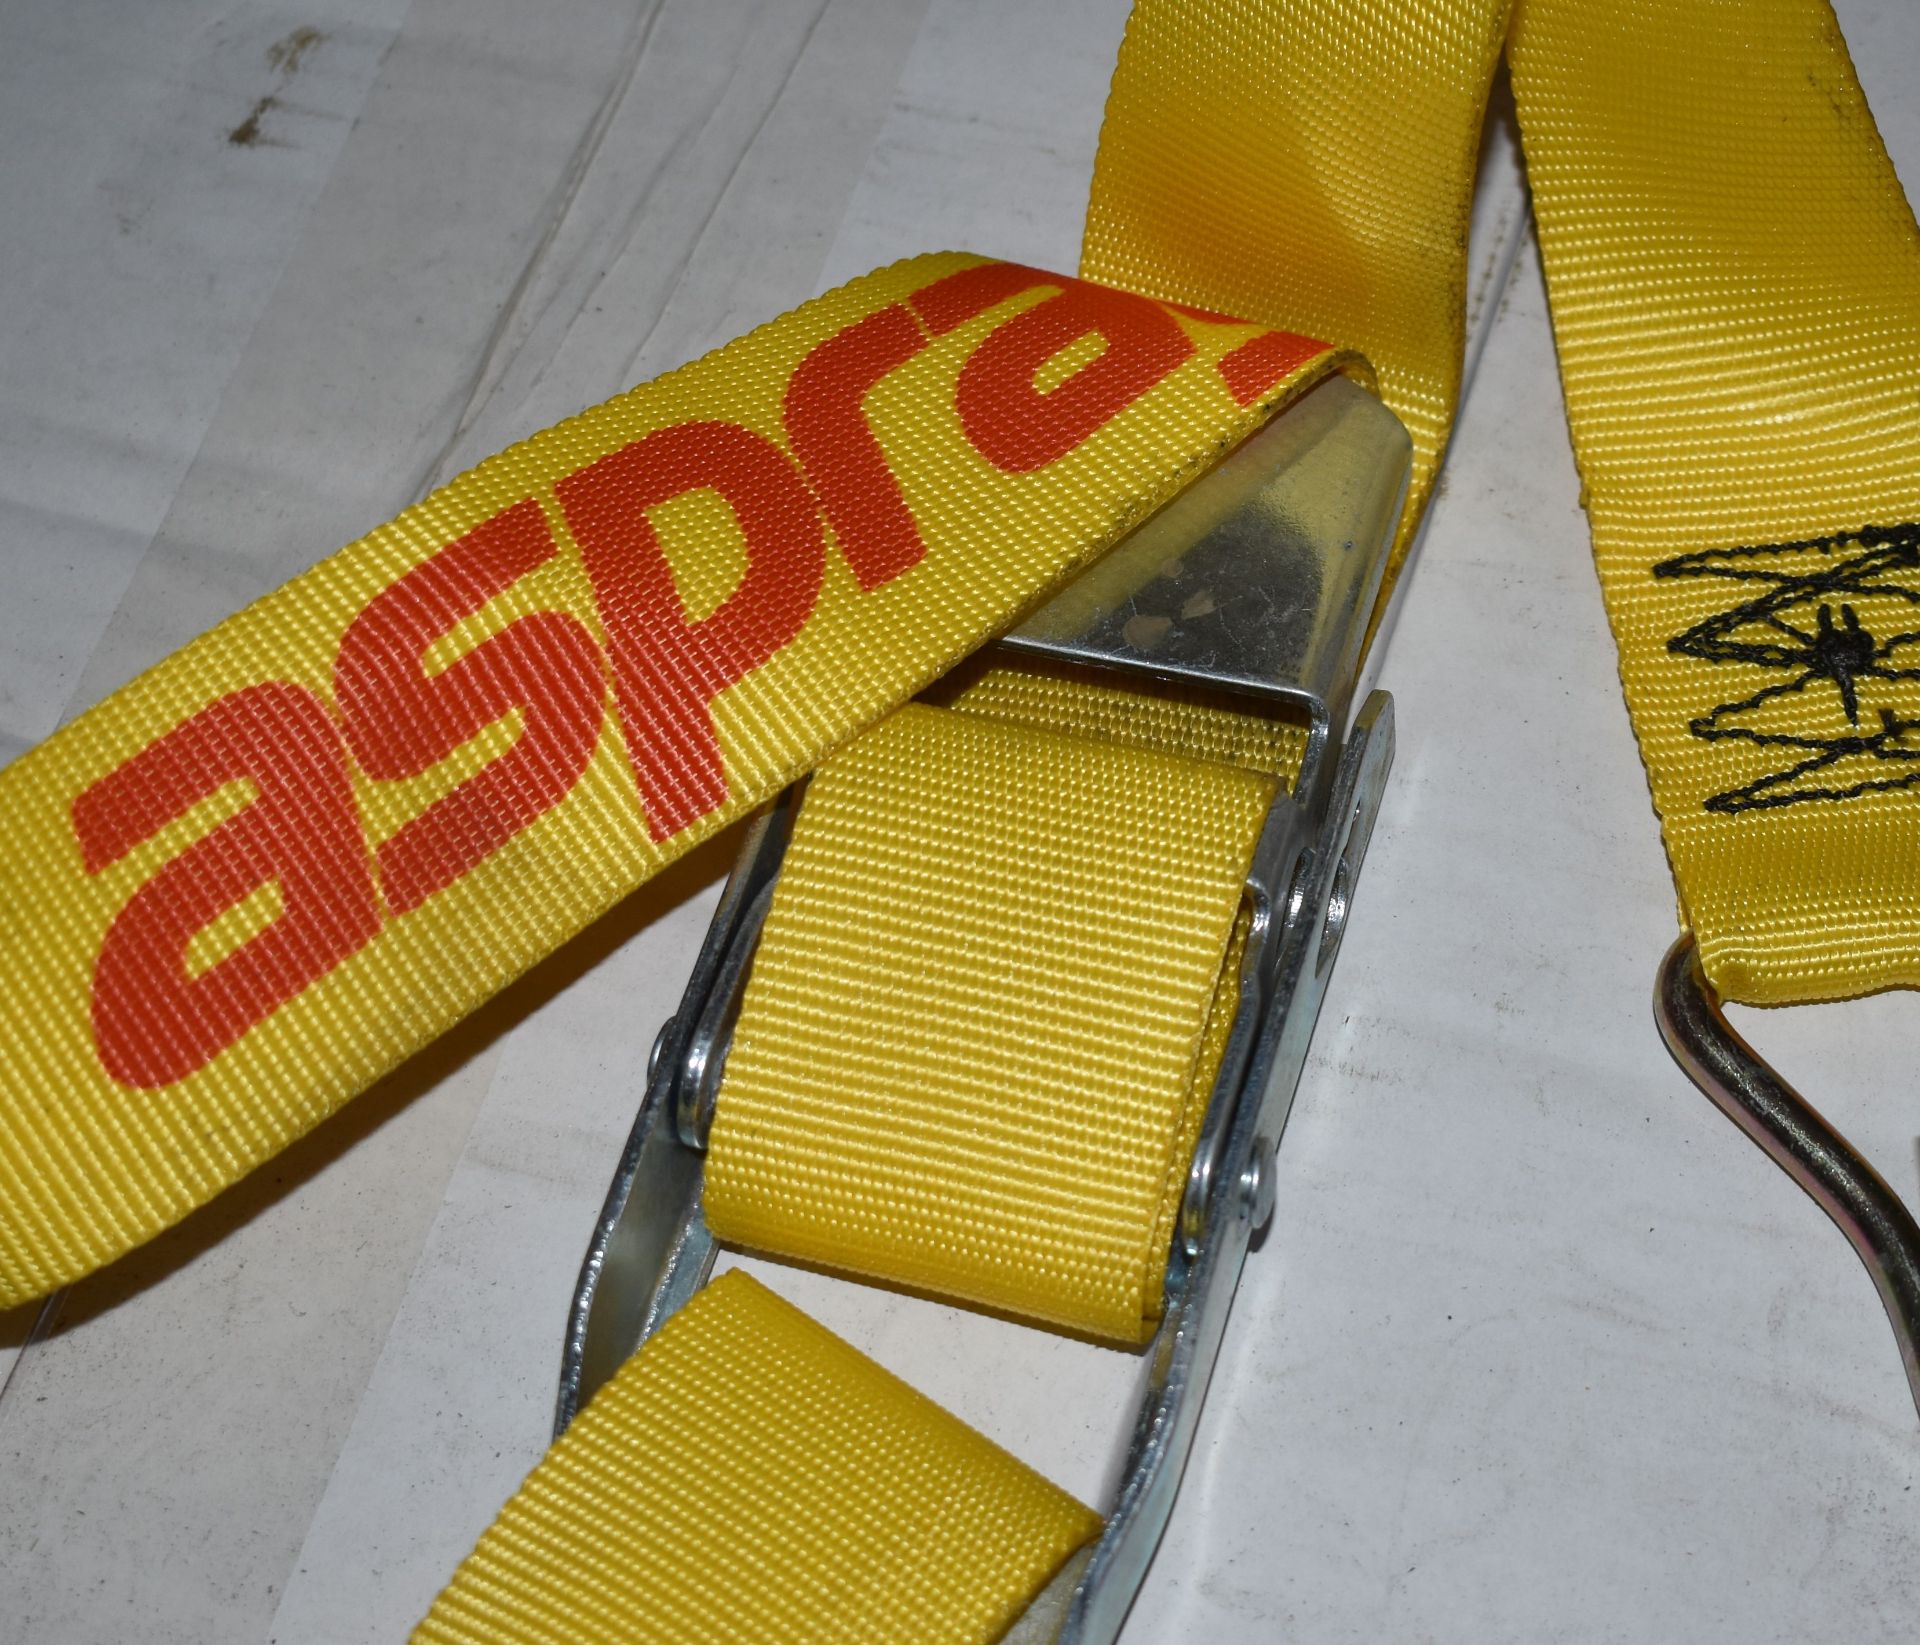 6 x TRP Load Control Cargo Vehicle Straps - 4m Length - CL622 - Ref JPR121 WH1 - Location: - Image 2 of 5